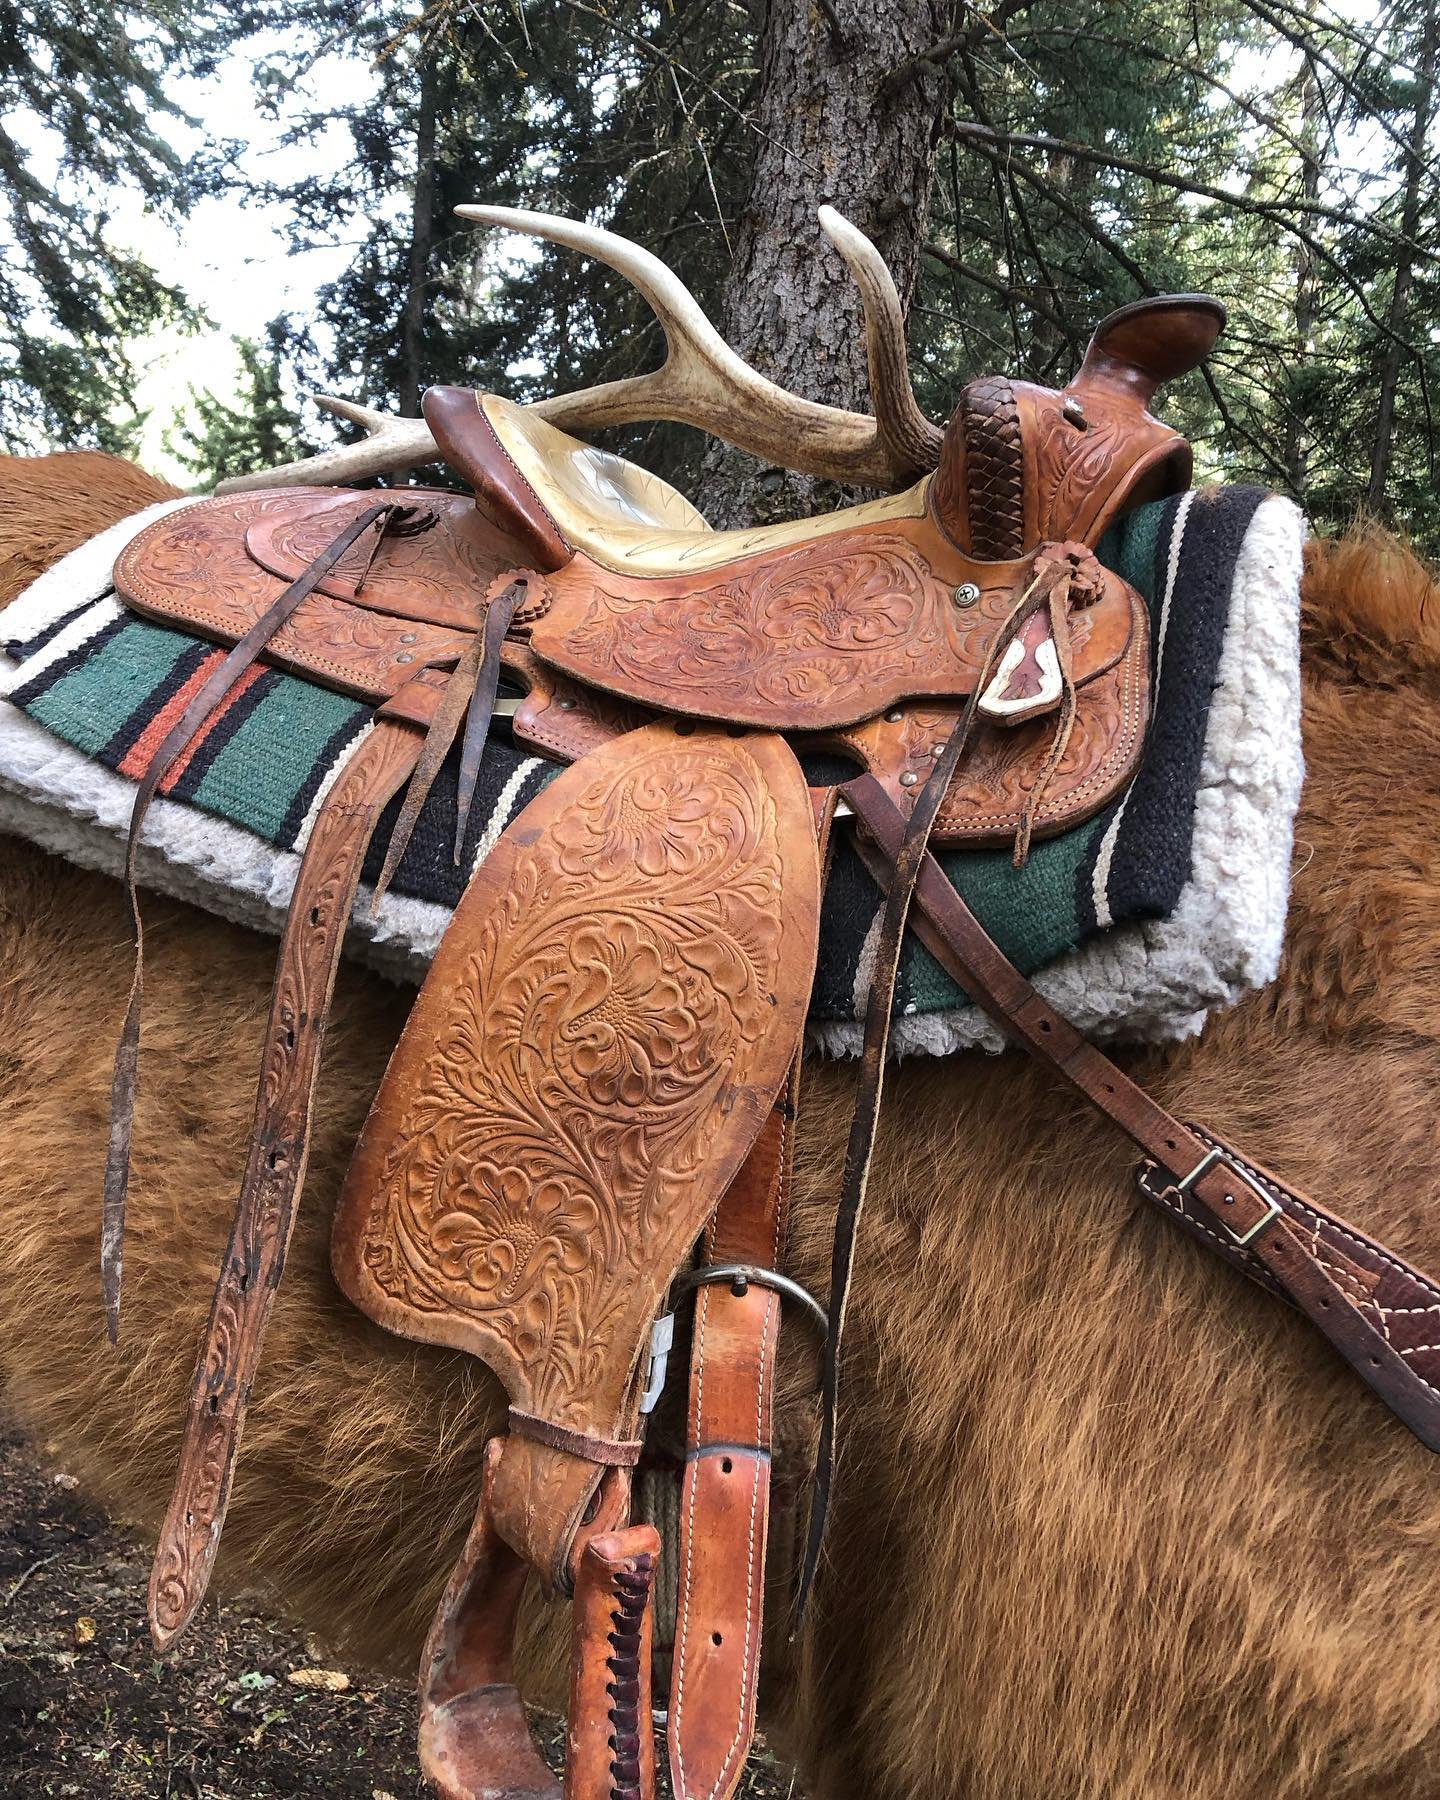 Our Spring rides have started up for the 2024 season! Book your seat in a saddle with JH Outfitting Company while open saddles are still available! You might even get lucky and find an elk shed! Link in Bio for more information.

www.jhoutfittingcomp